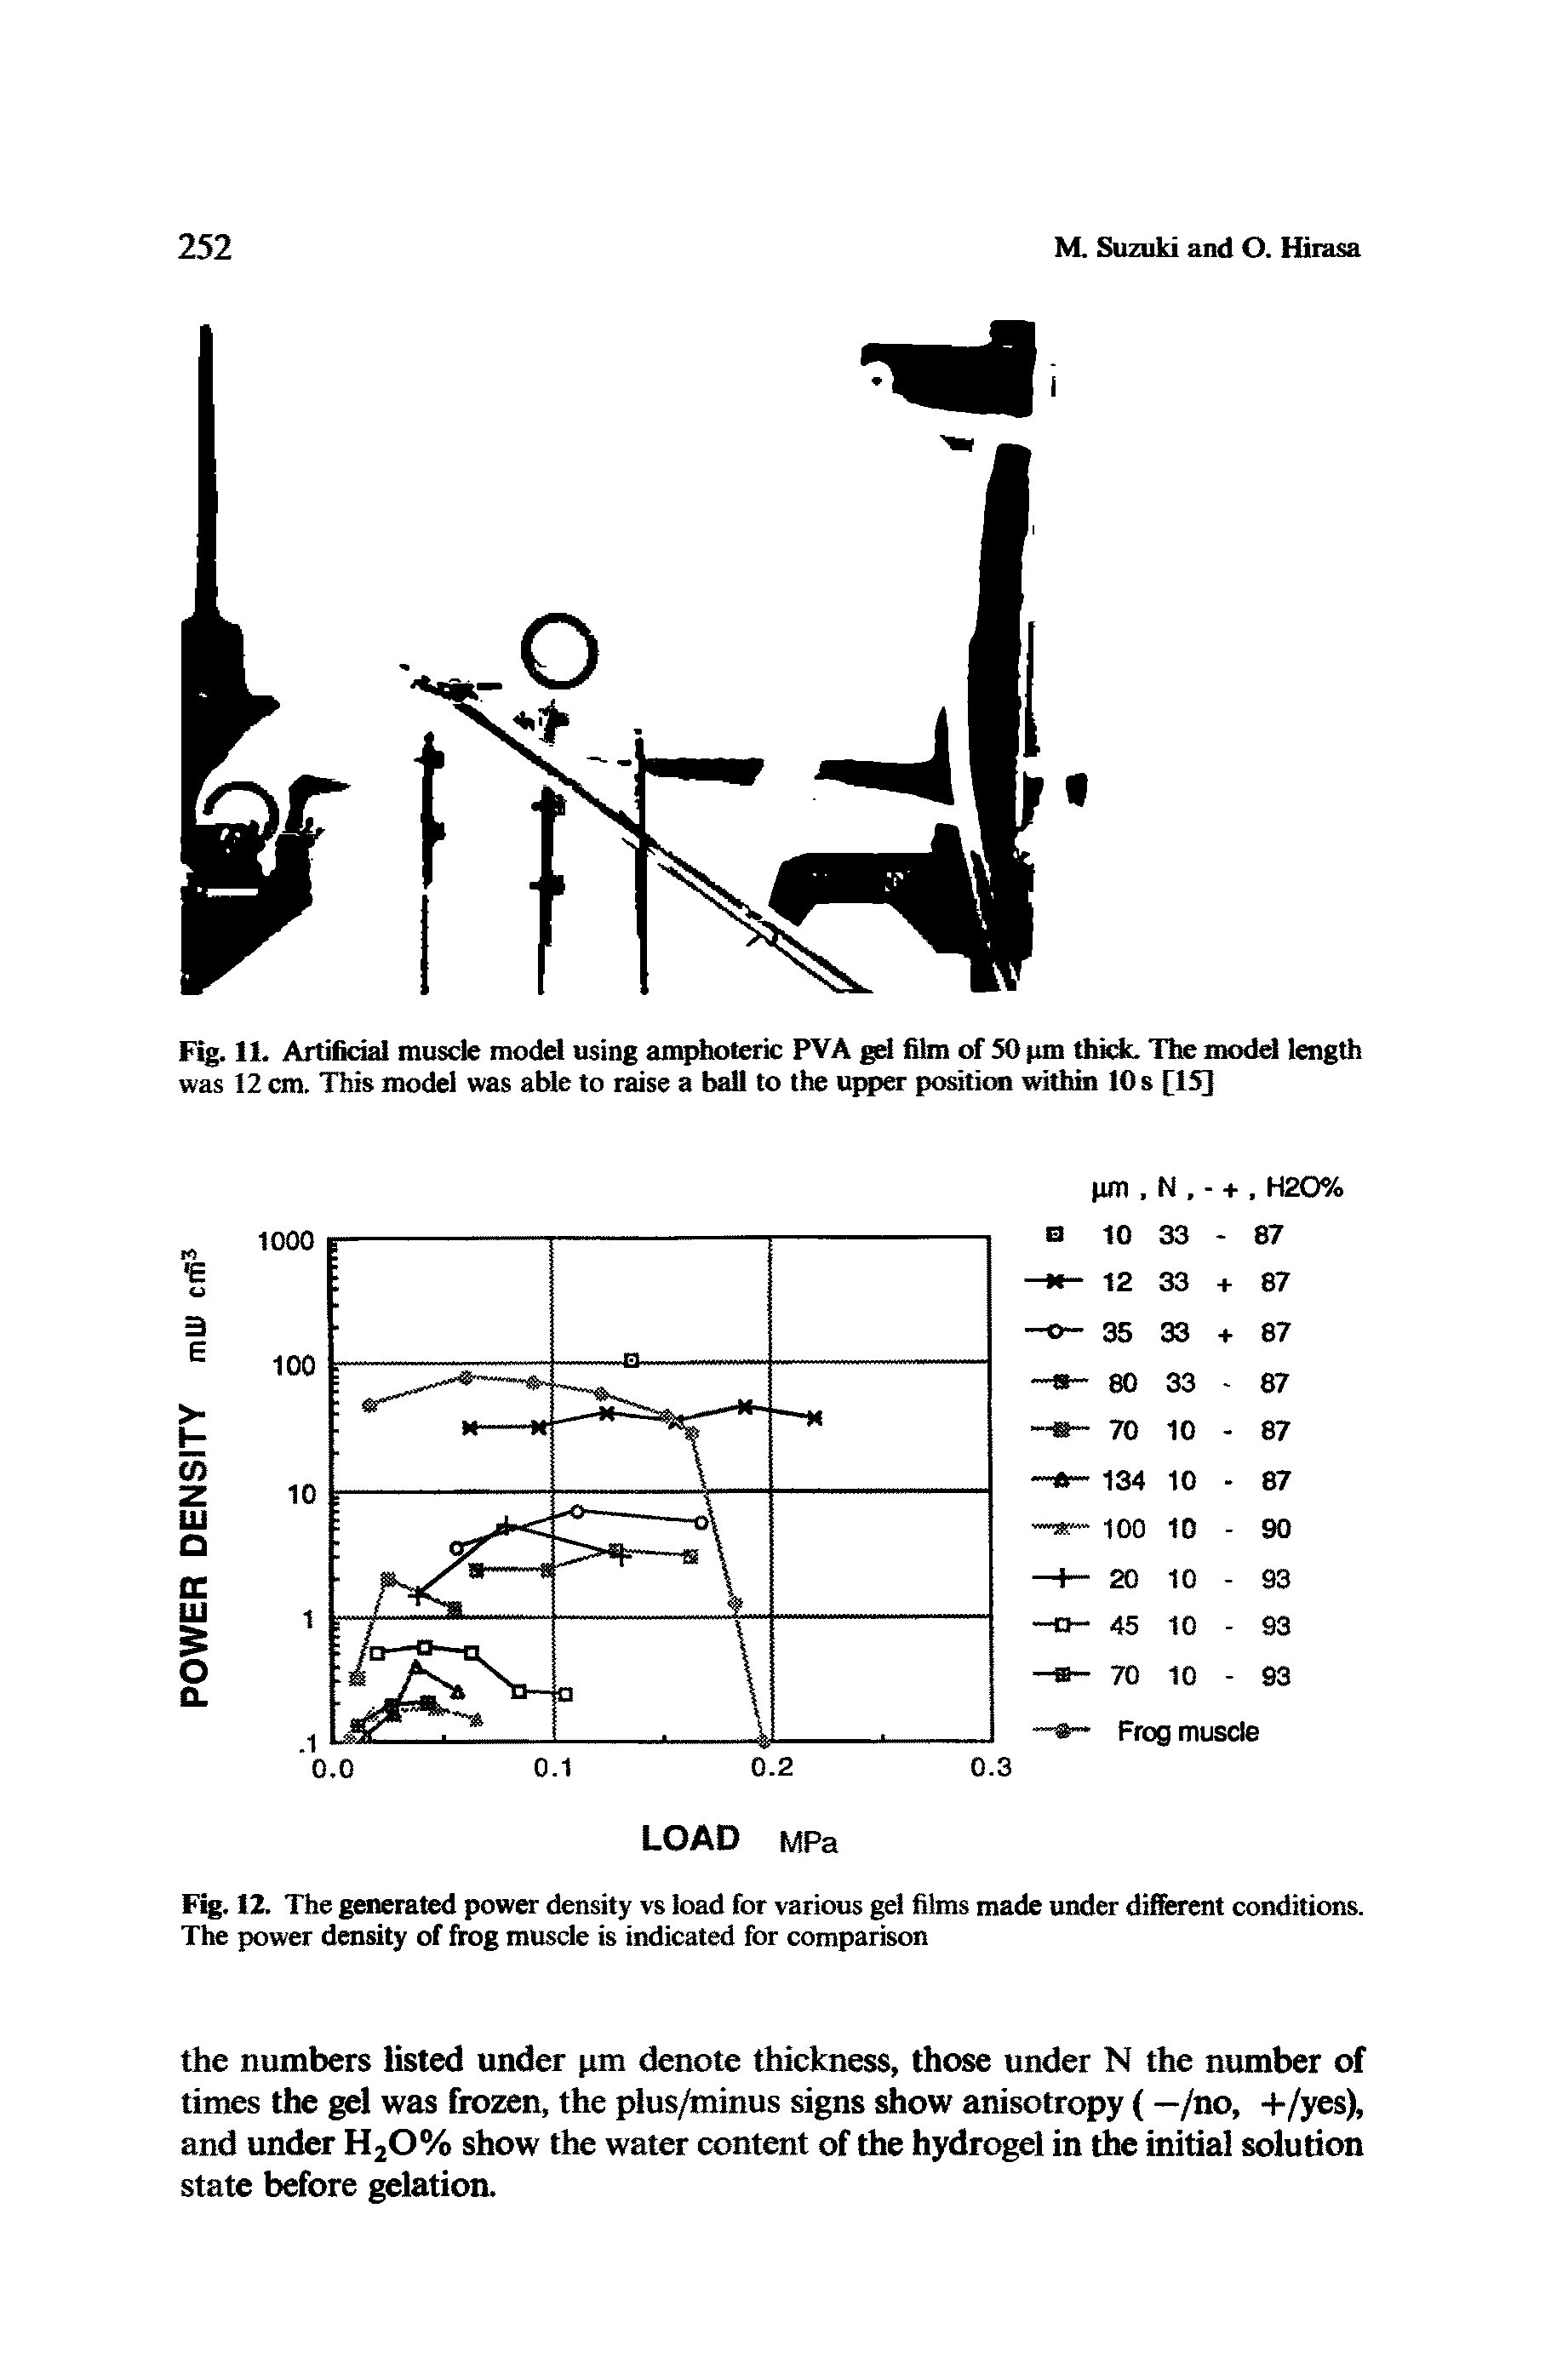 Fig. 12. The generated power density vs load for various gel films made under different conditions. The power density of frog muscle is indicated for comparison...